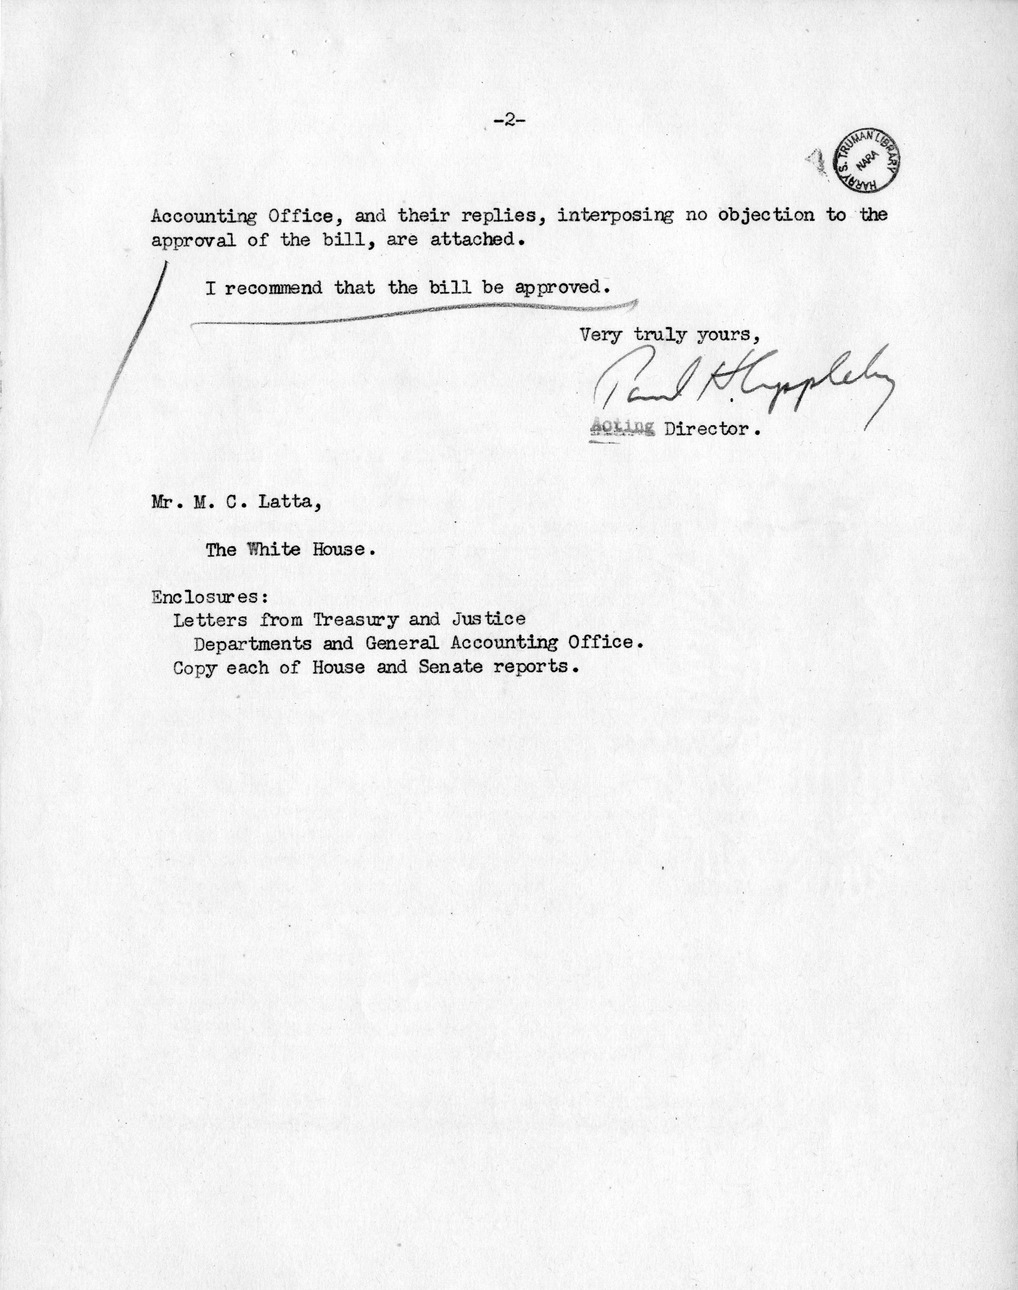 Memorandum from Paul H. Appleby to M. C. Latta, H. R. 129, To Provide for the Barring of Certain Claims by the United States in Connection With Government Checks and Warrants, with Attachments